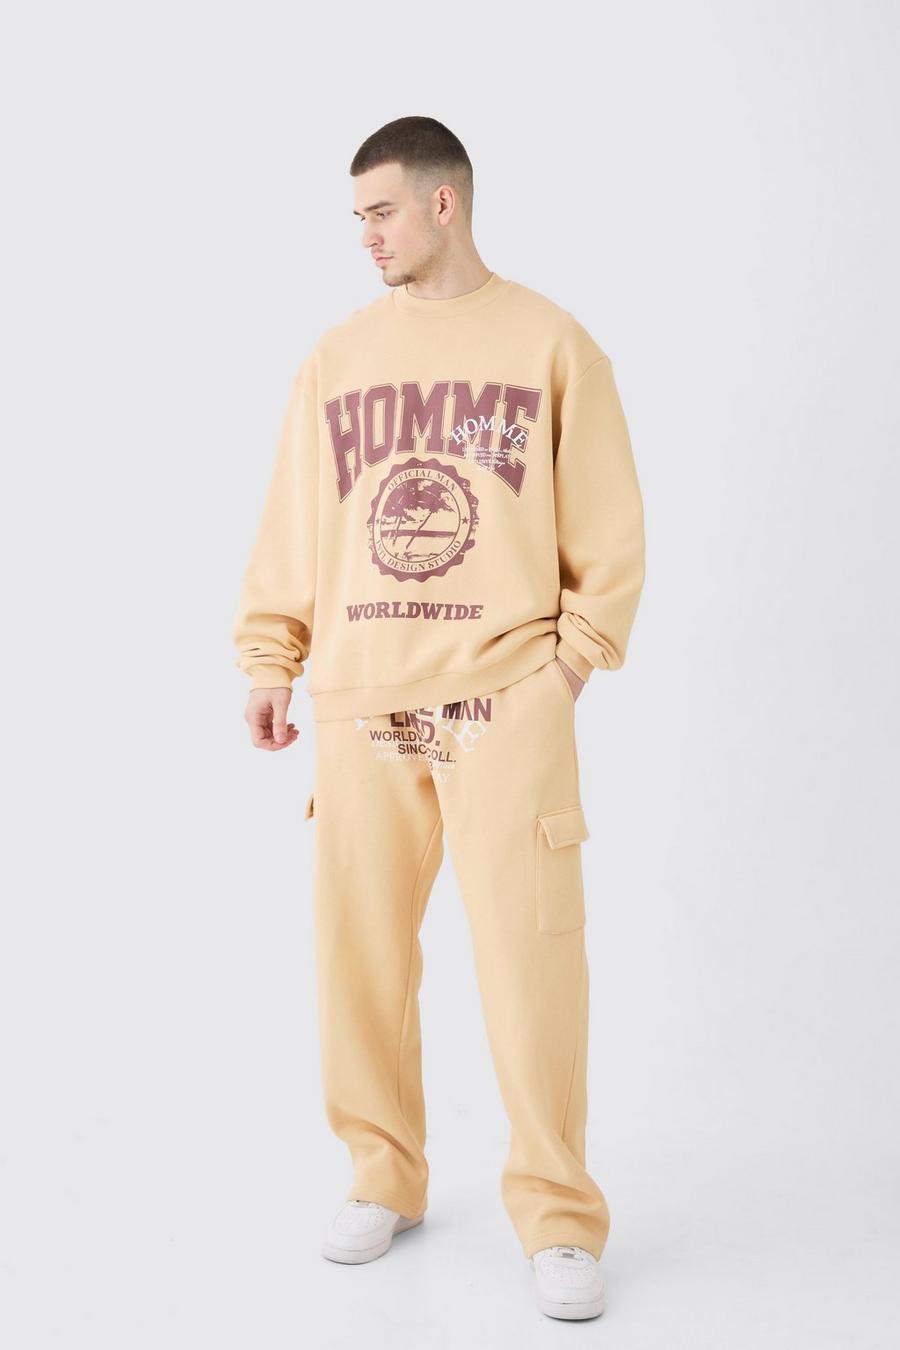 Chándal Tall con sudadera oversize y estampado Homme Worldwide, Sand image number 1